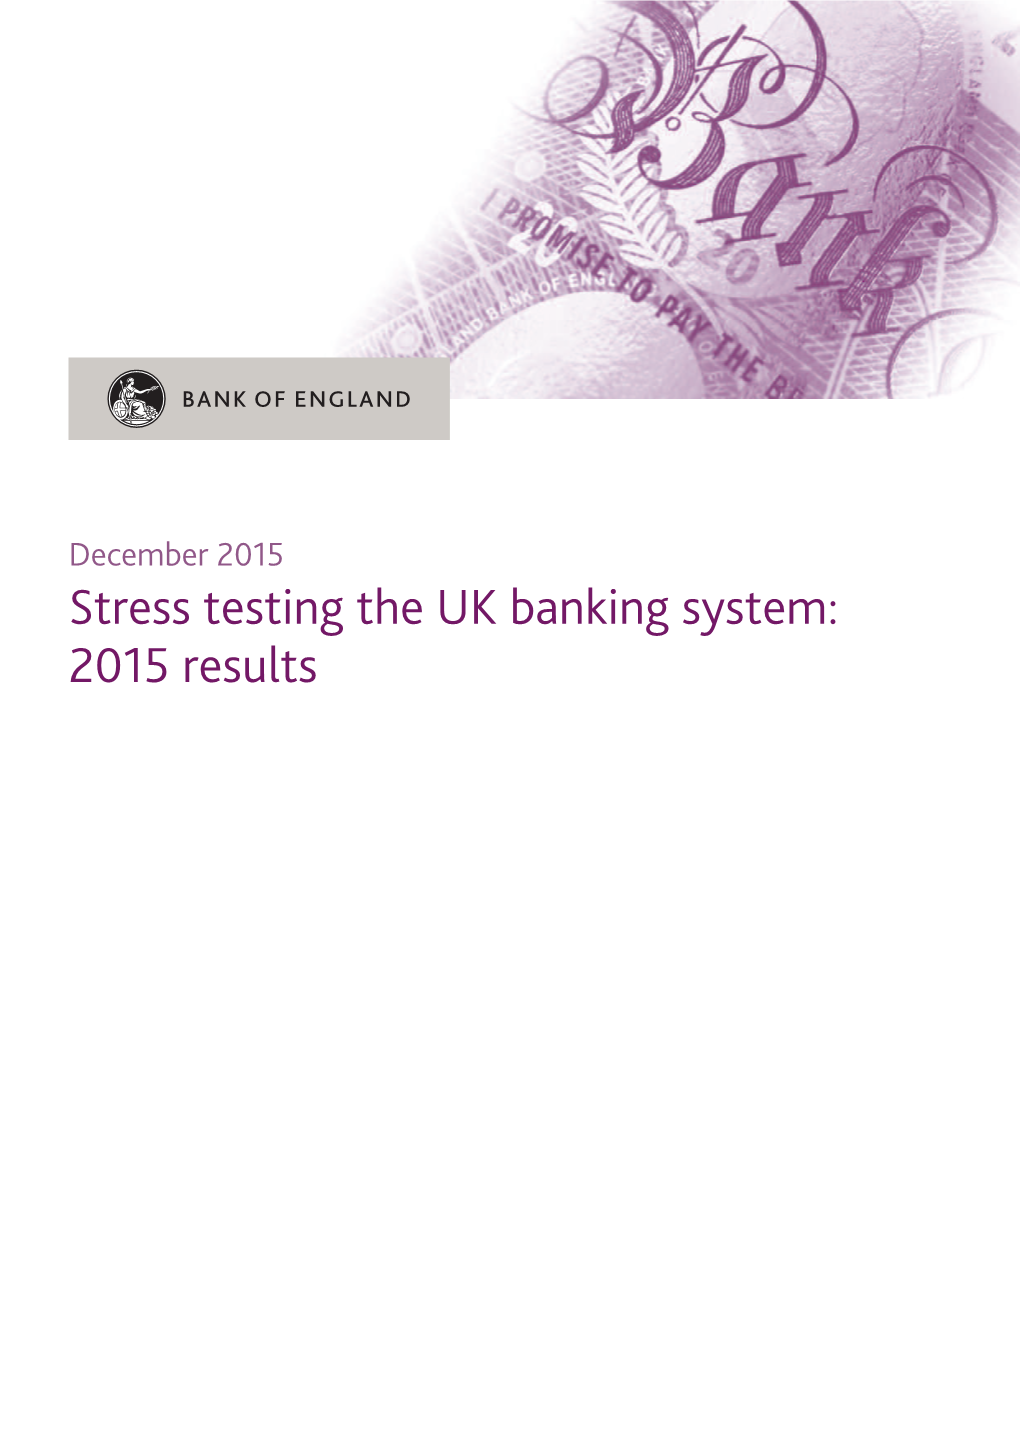 Stress Testing the UK Banking System: 2015 Results